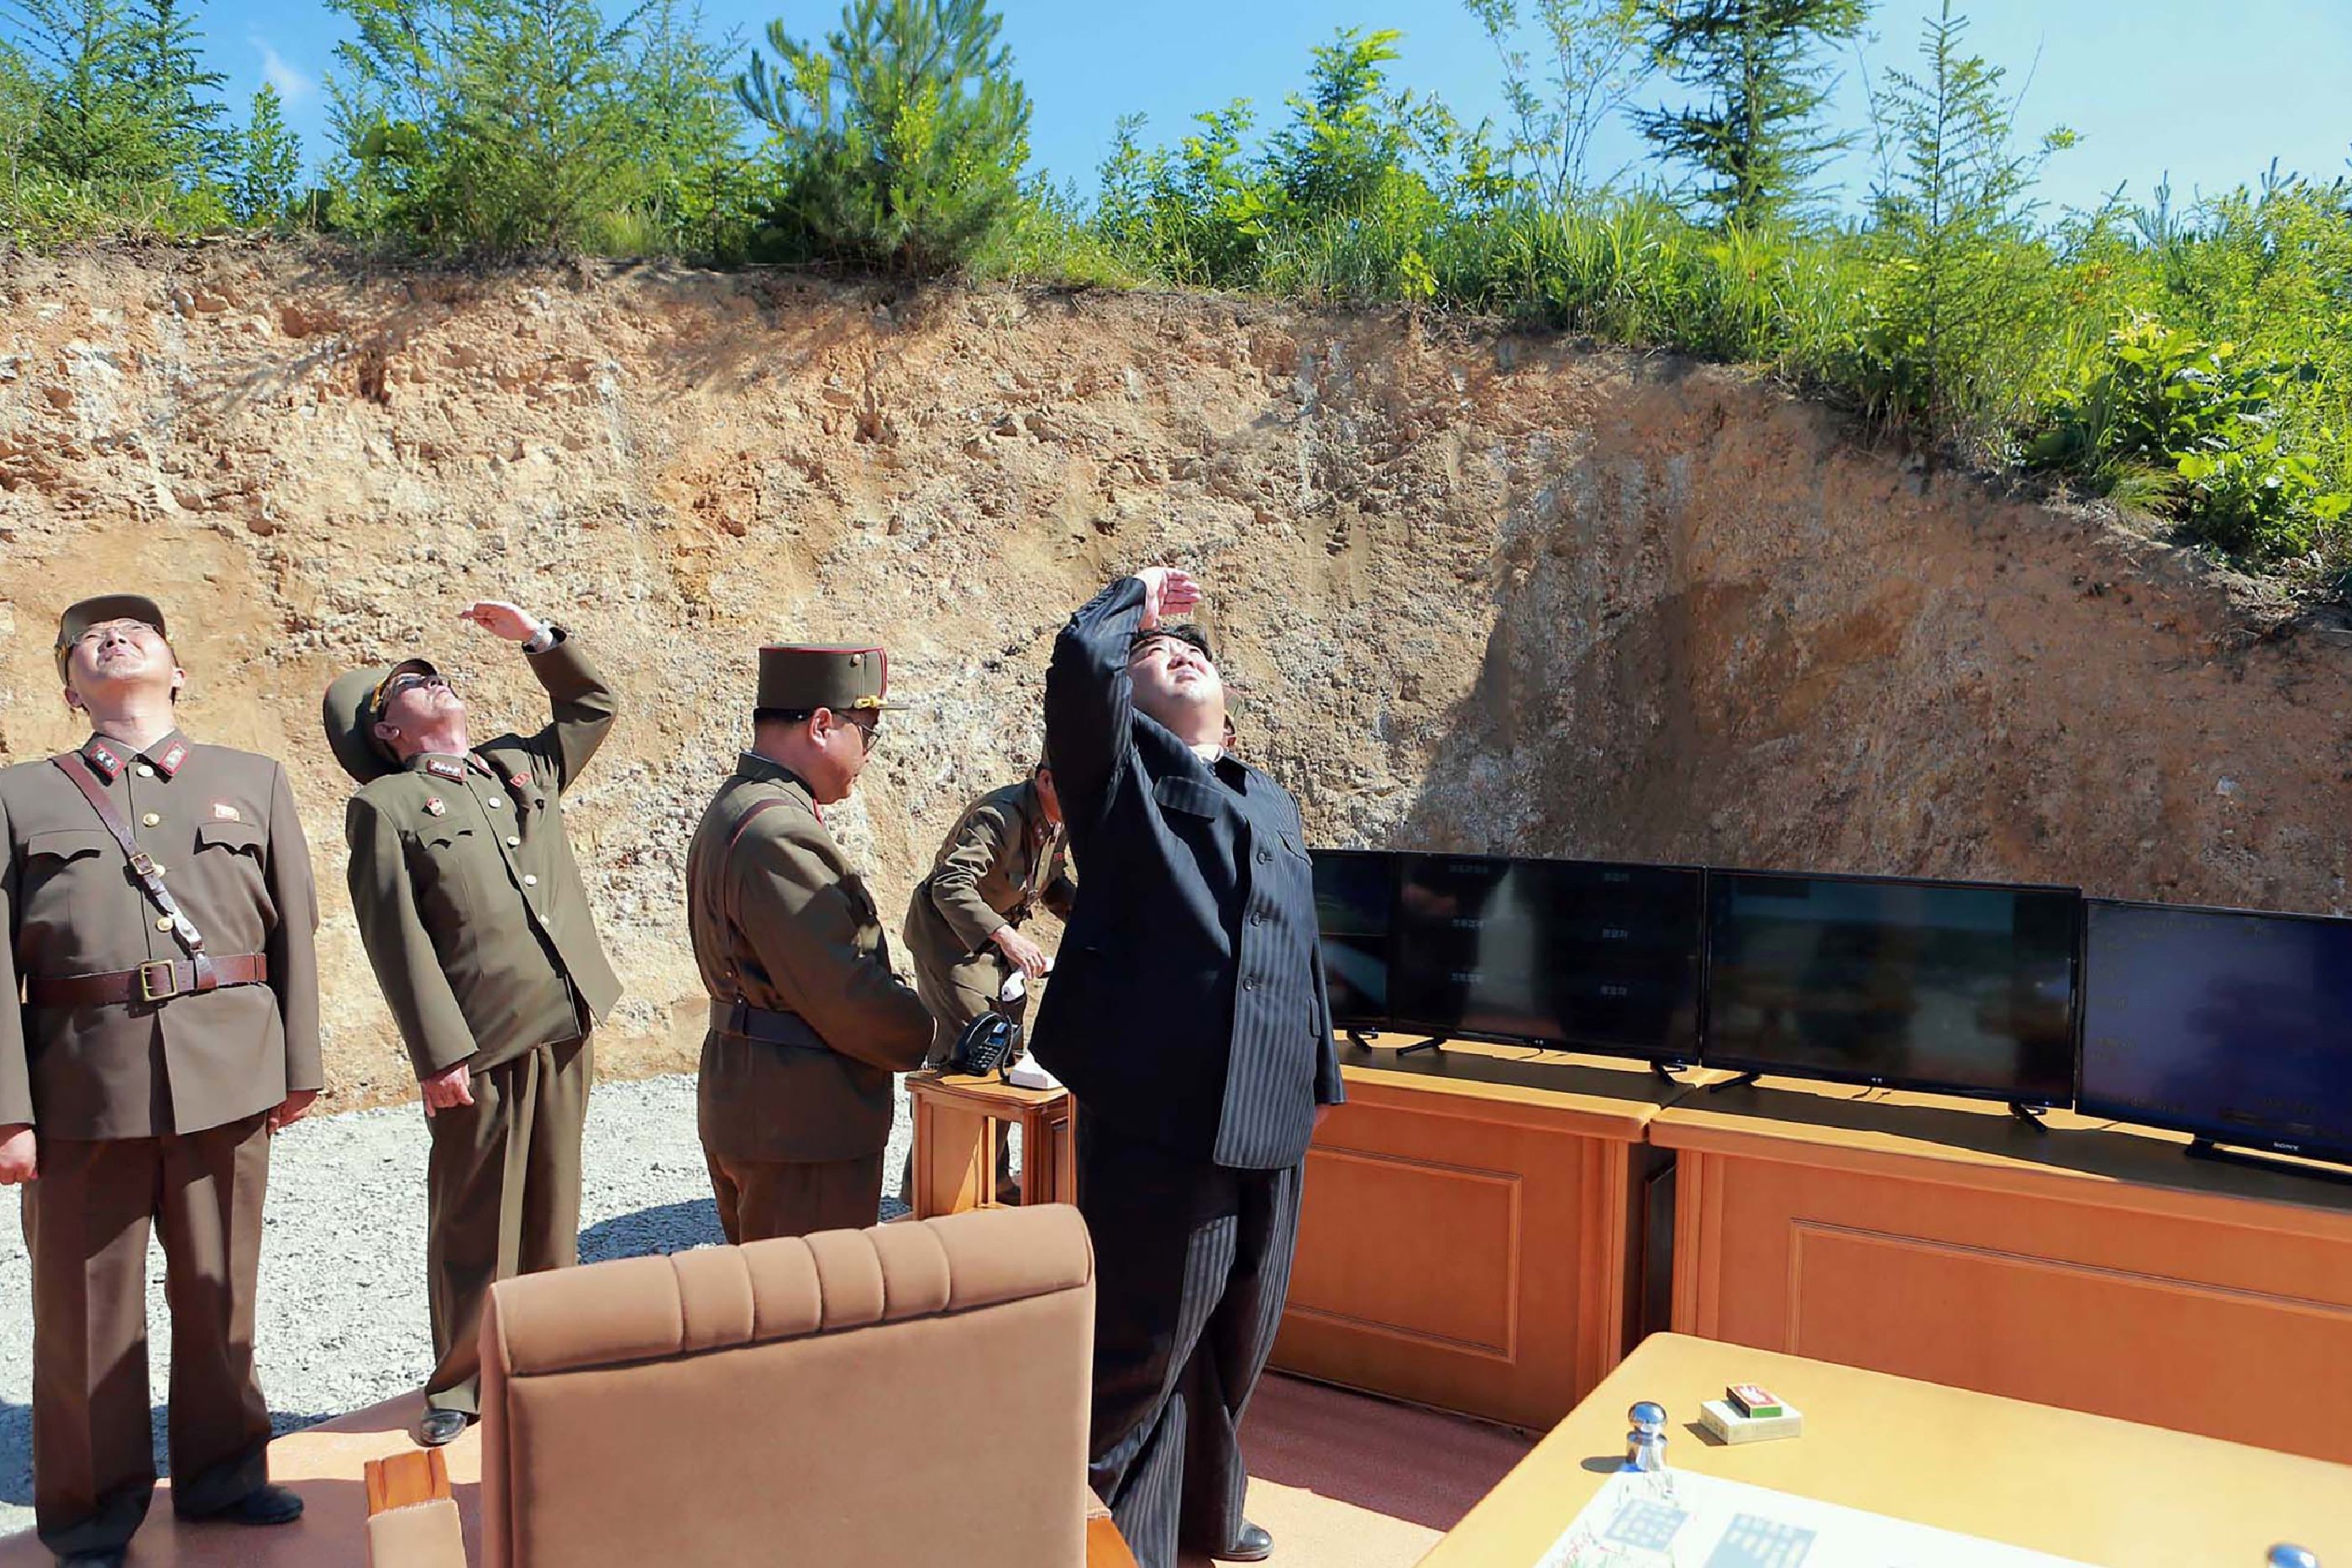 North Korean leader Kim Jong-un inspects the successful test-firing of the intercontinental ballistic missile Hwasong-14, at an undisclosed location on July 4. Photo: AFP/KCNA via KNS